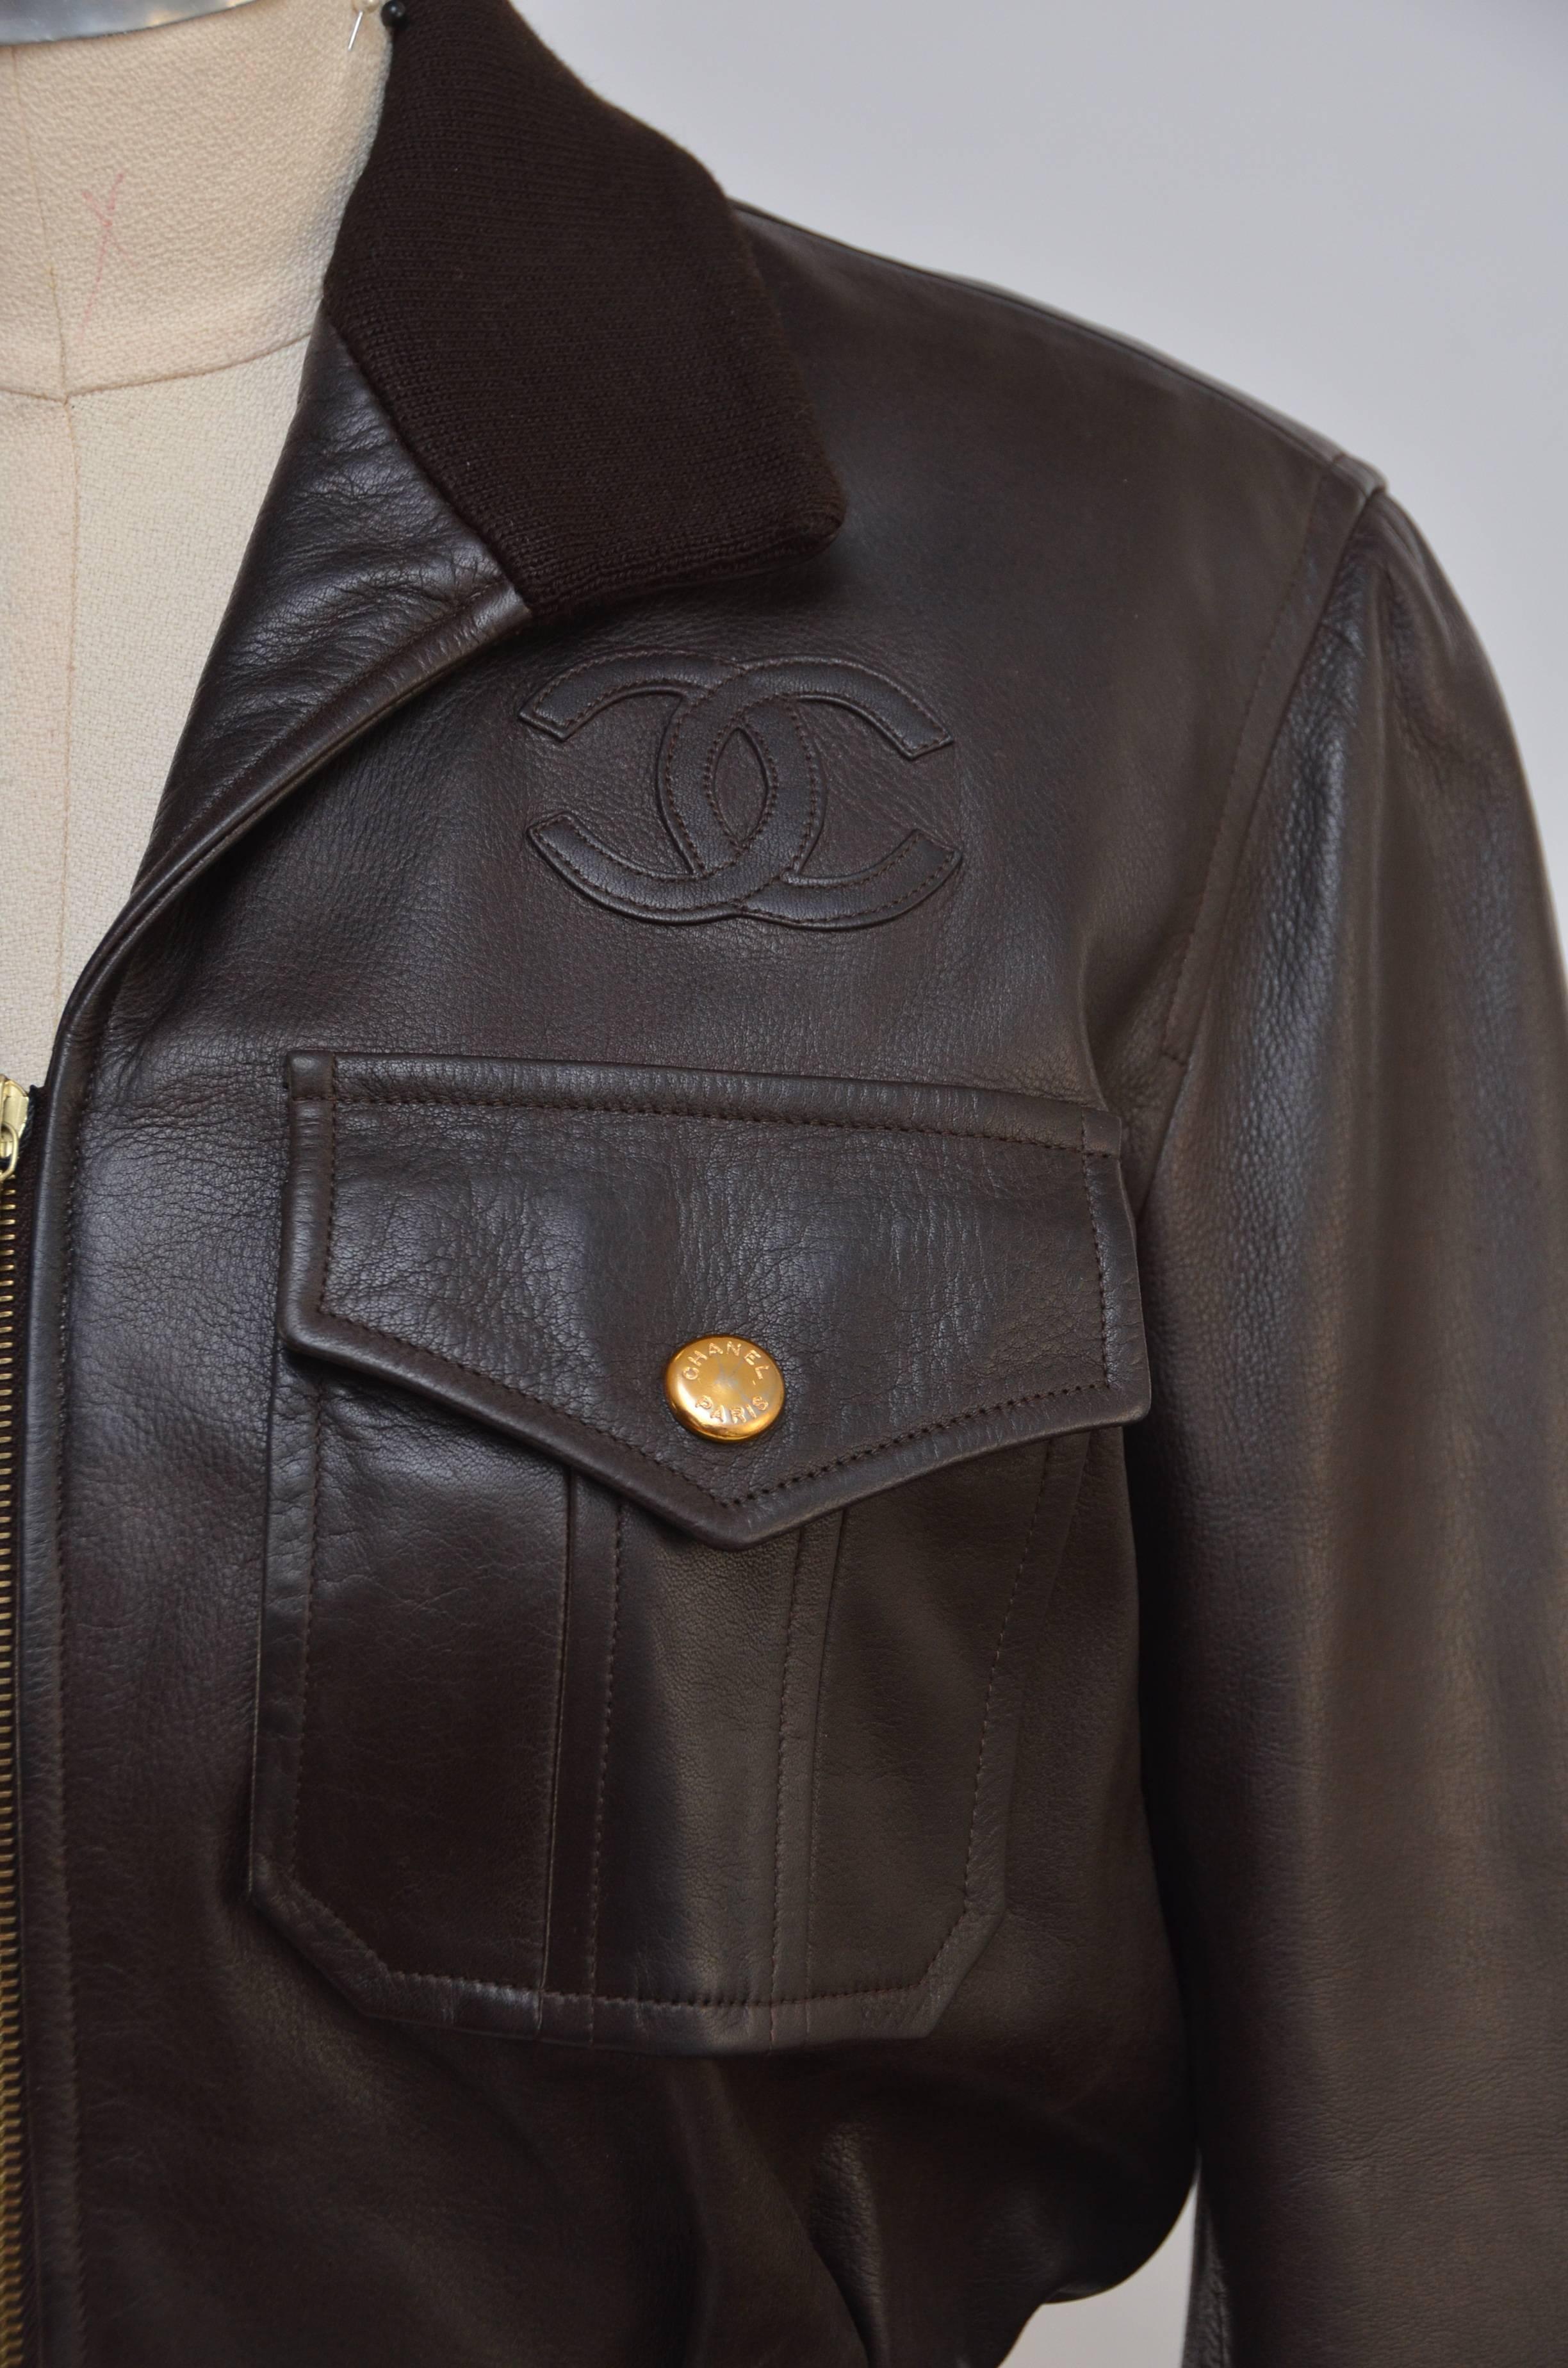 Chanel brown leather jacket.
No size listed but photographed on mannequin size 6 US.I would estimate this jacket to be size 4 US.
Zipper closure on the front.2 pockets in the front with snap closure.
Excellent vintage mint condition.

FINAL SALE.